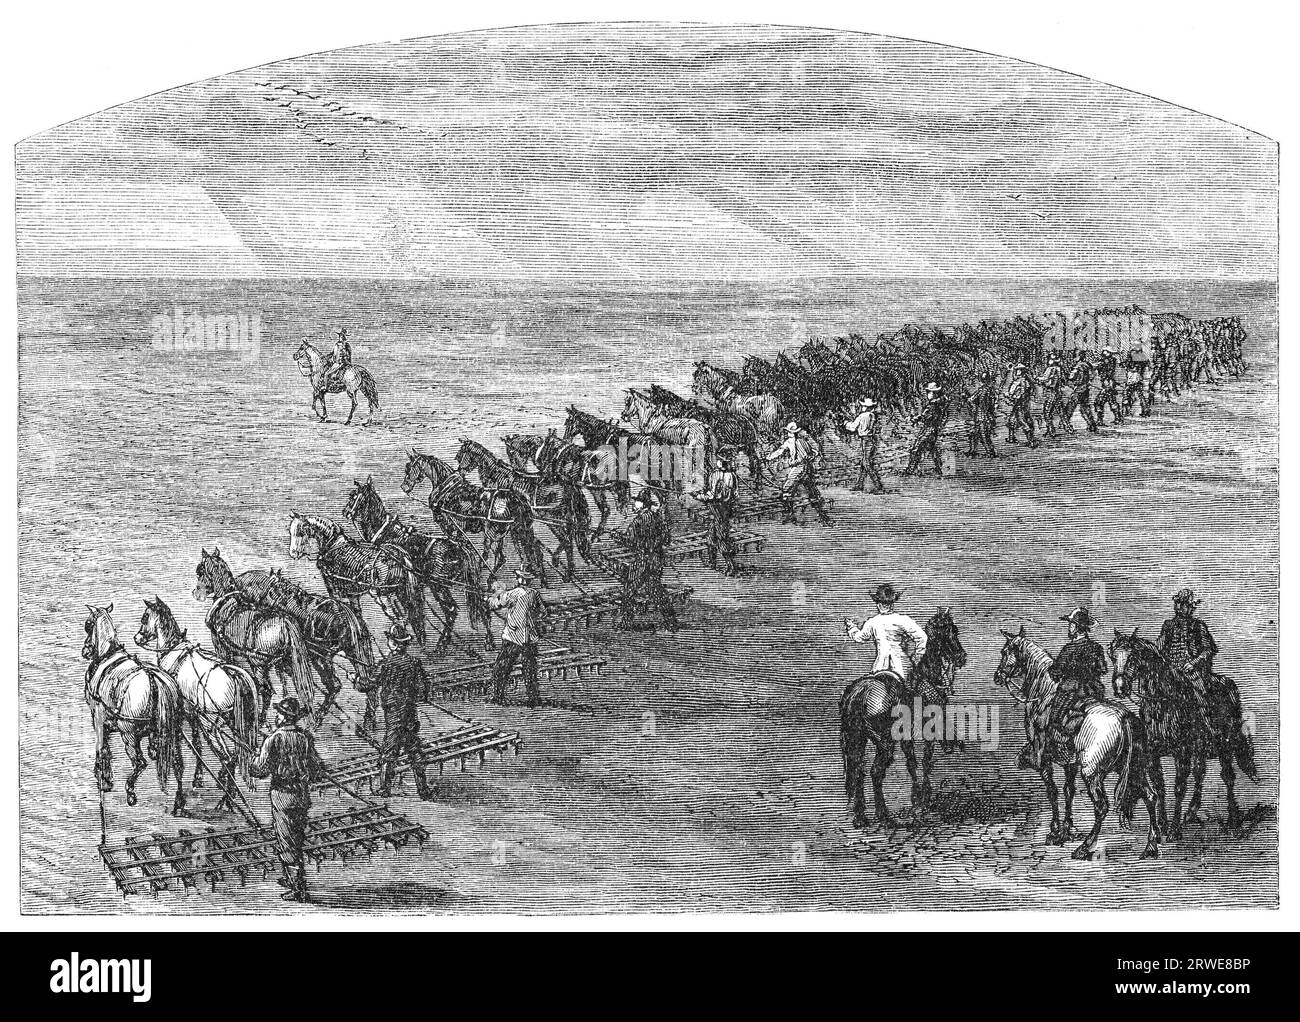 Agriculture in Dakota, USA: Harrowing. Image source: Harpers Monthly magazine march 1880 Stock Photo